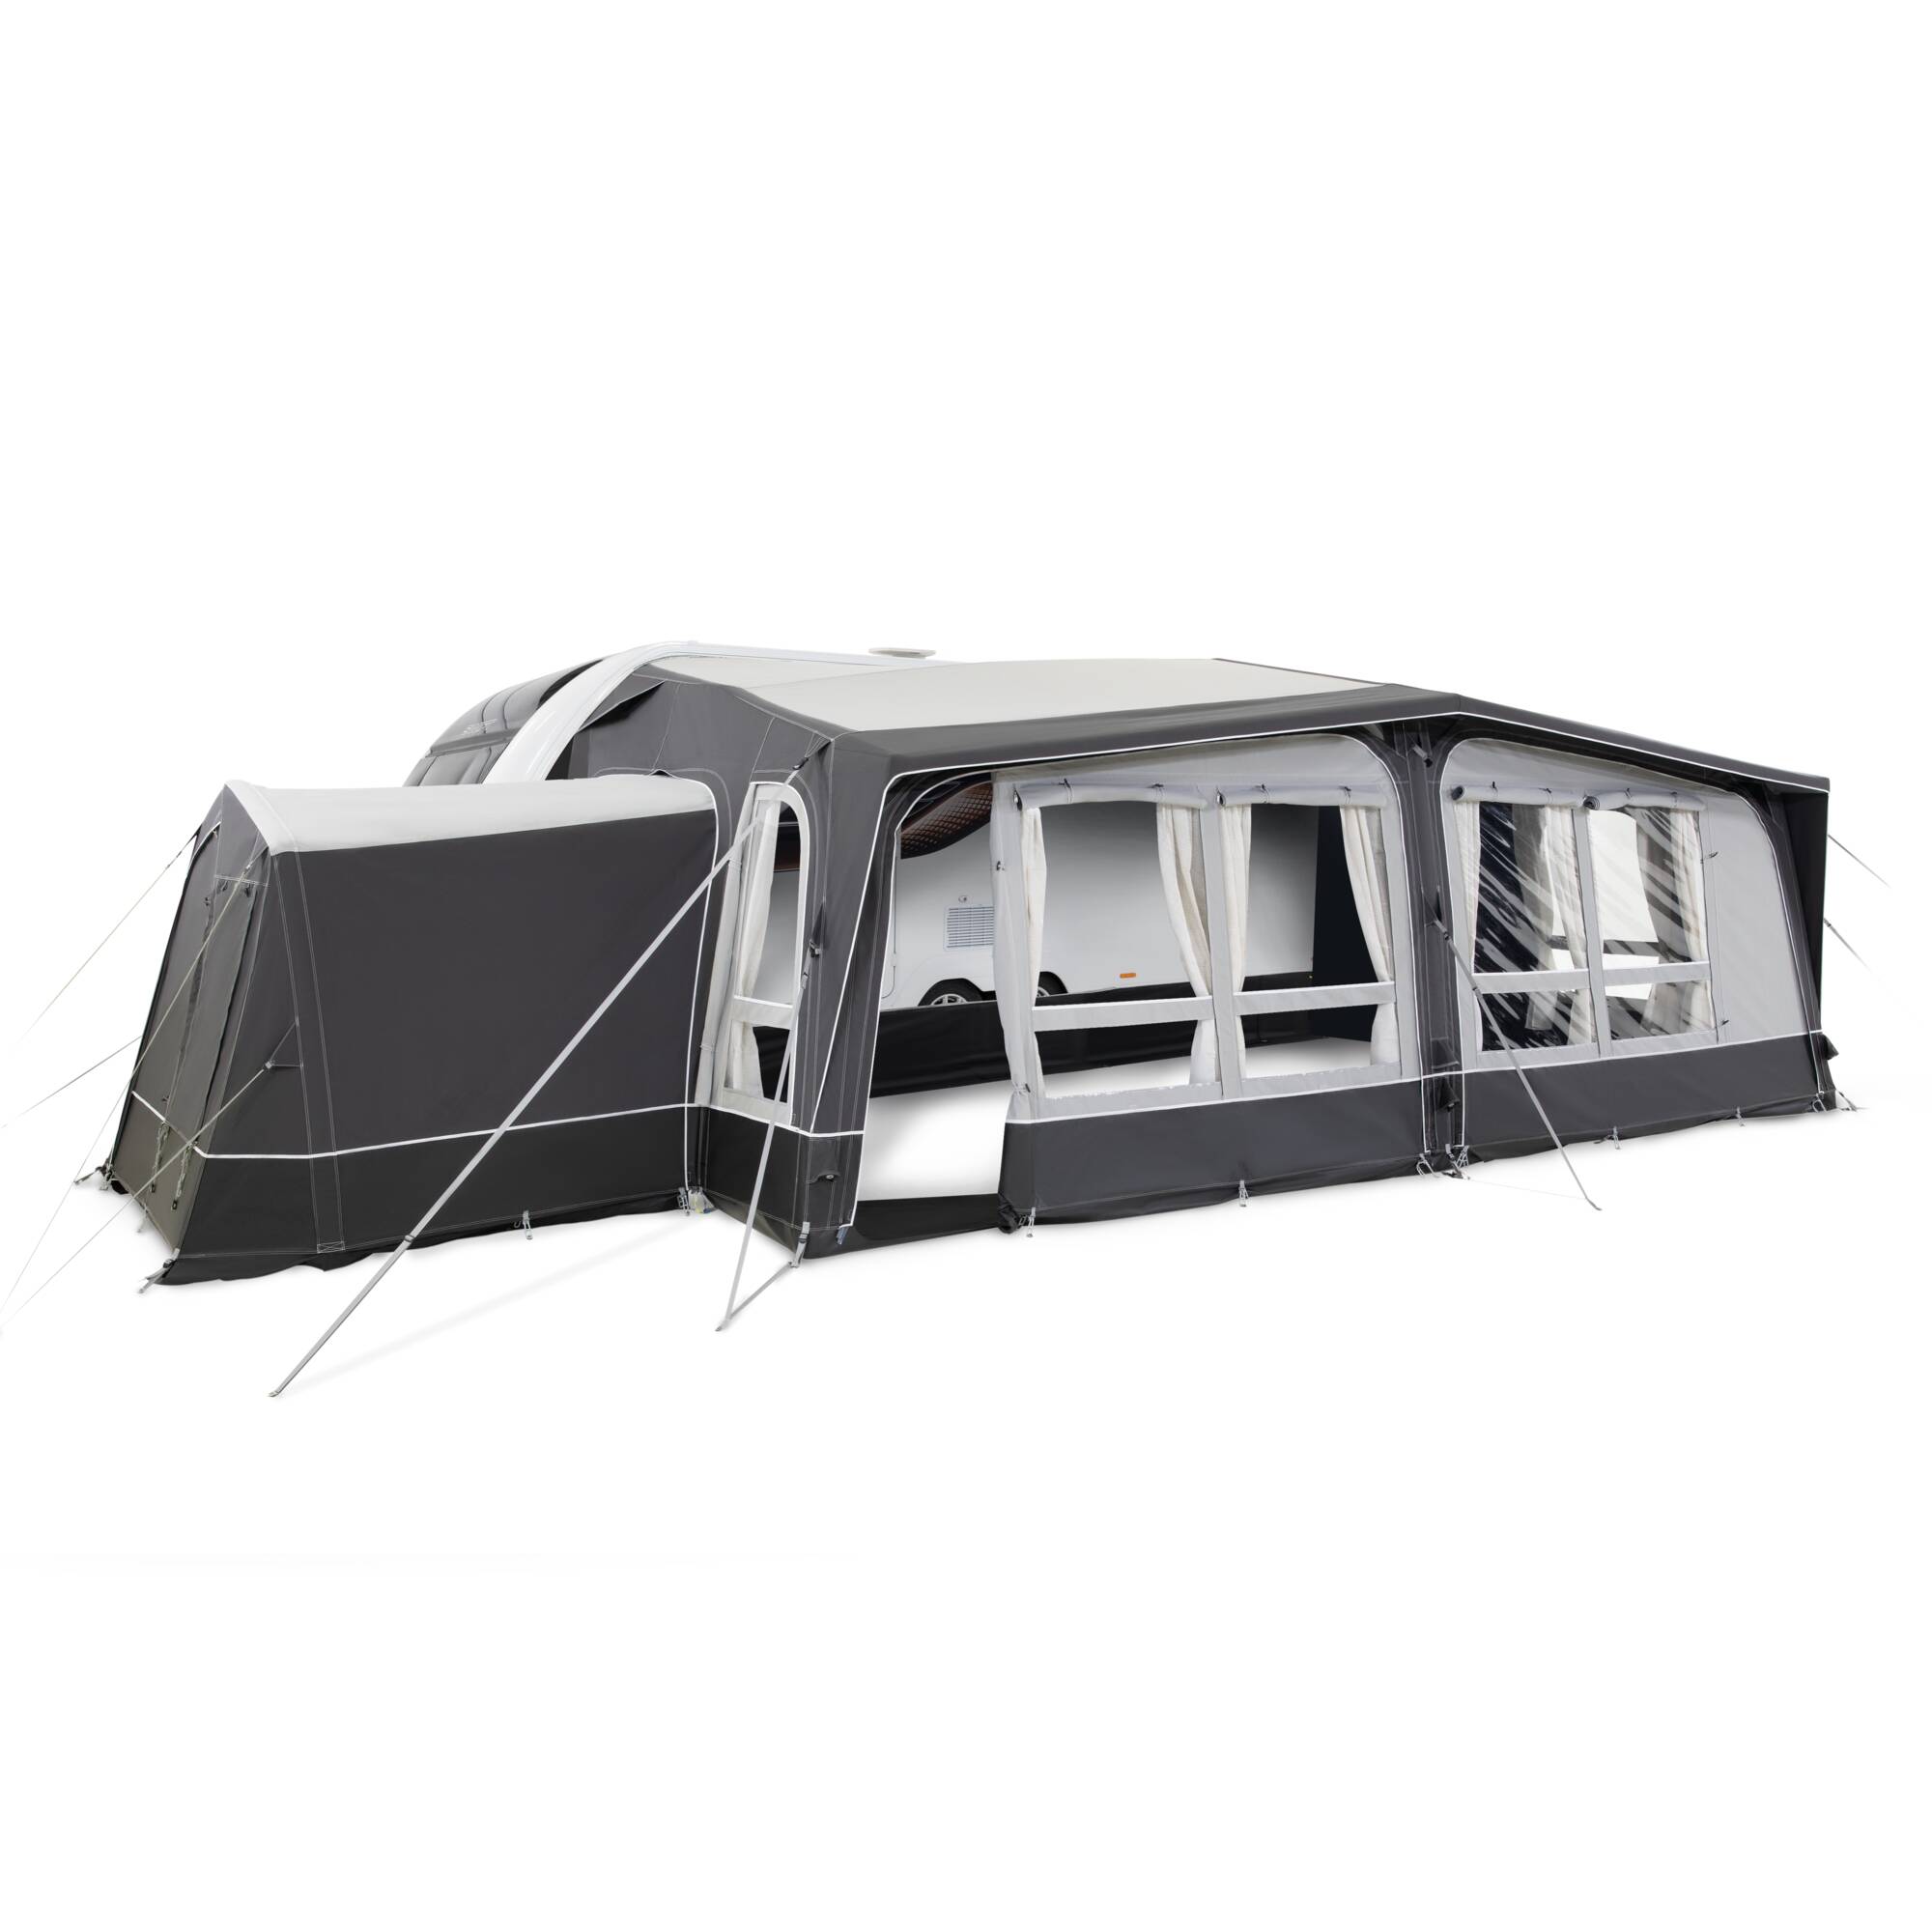 Dometic Residence Air Tall Annex E Awning Spare Parts